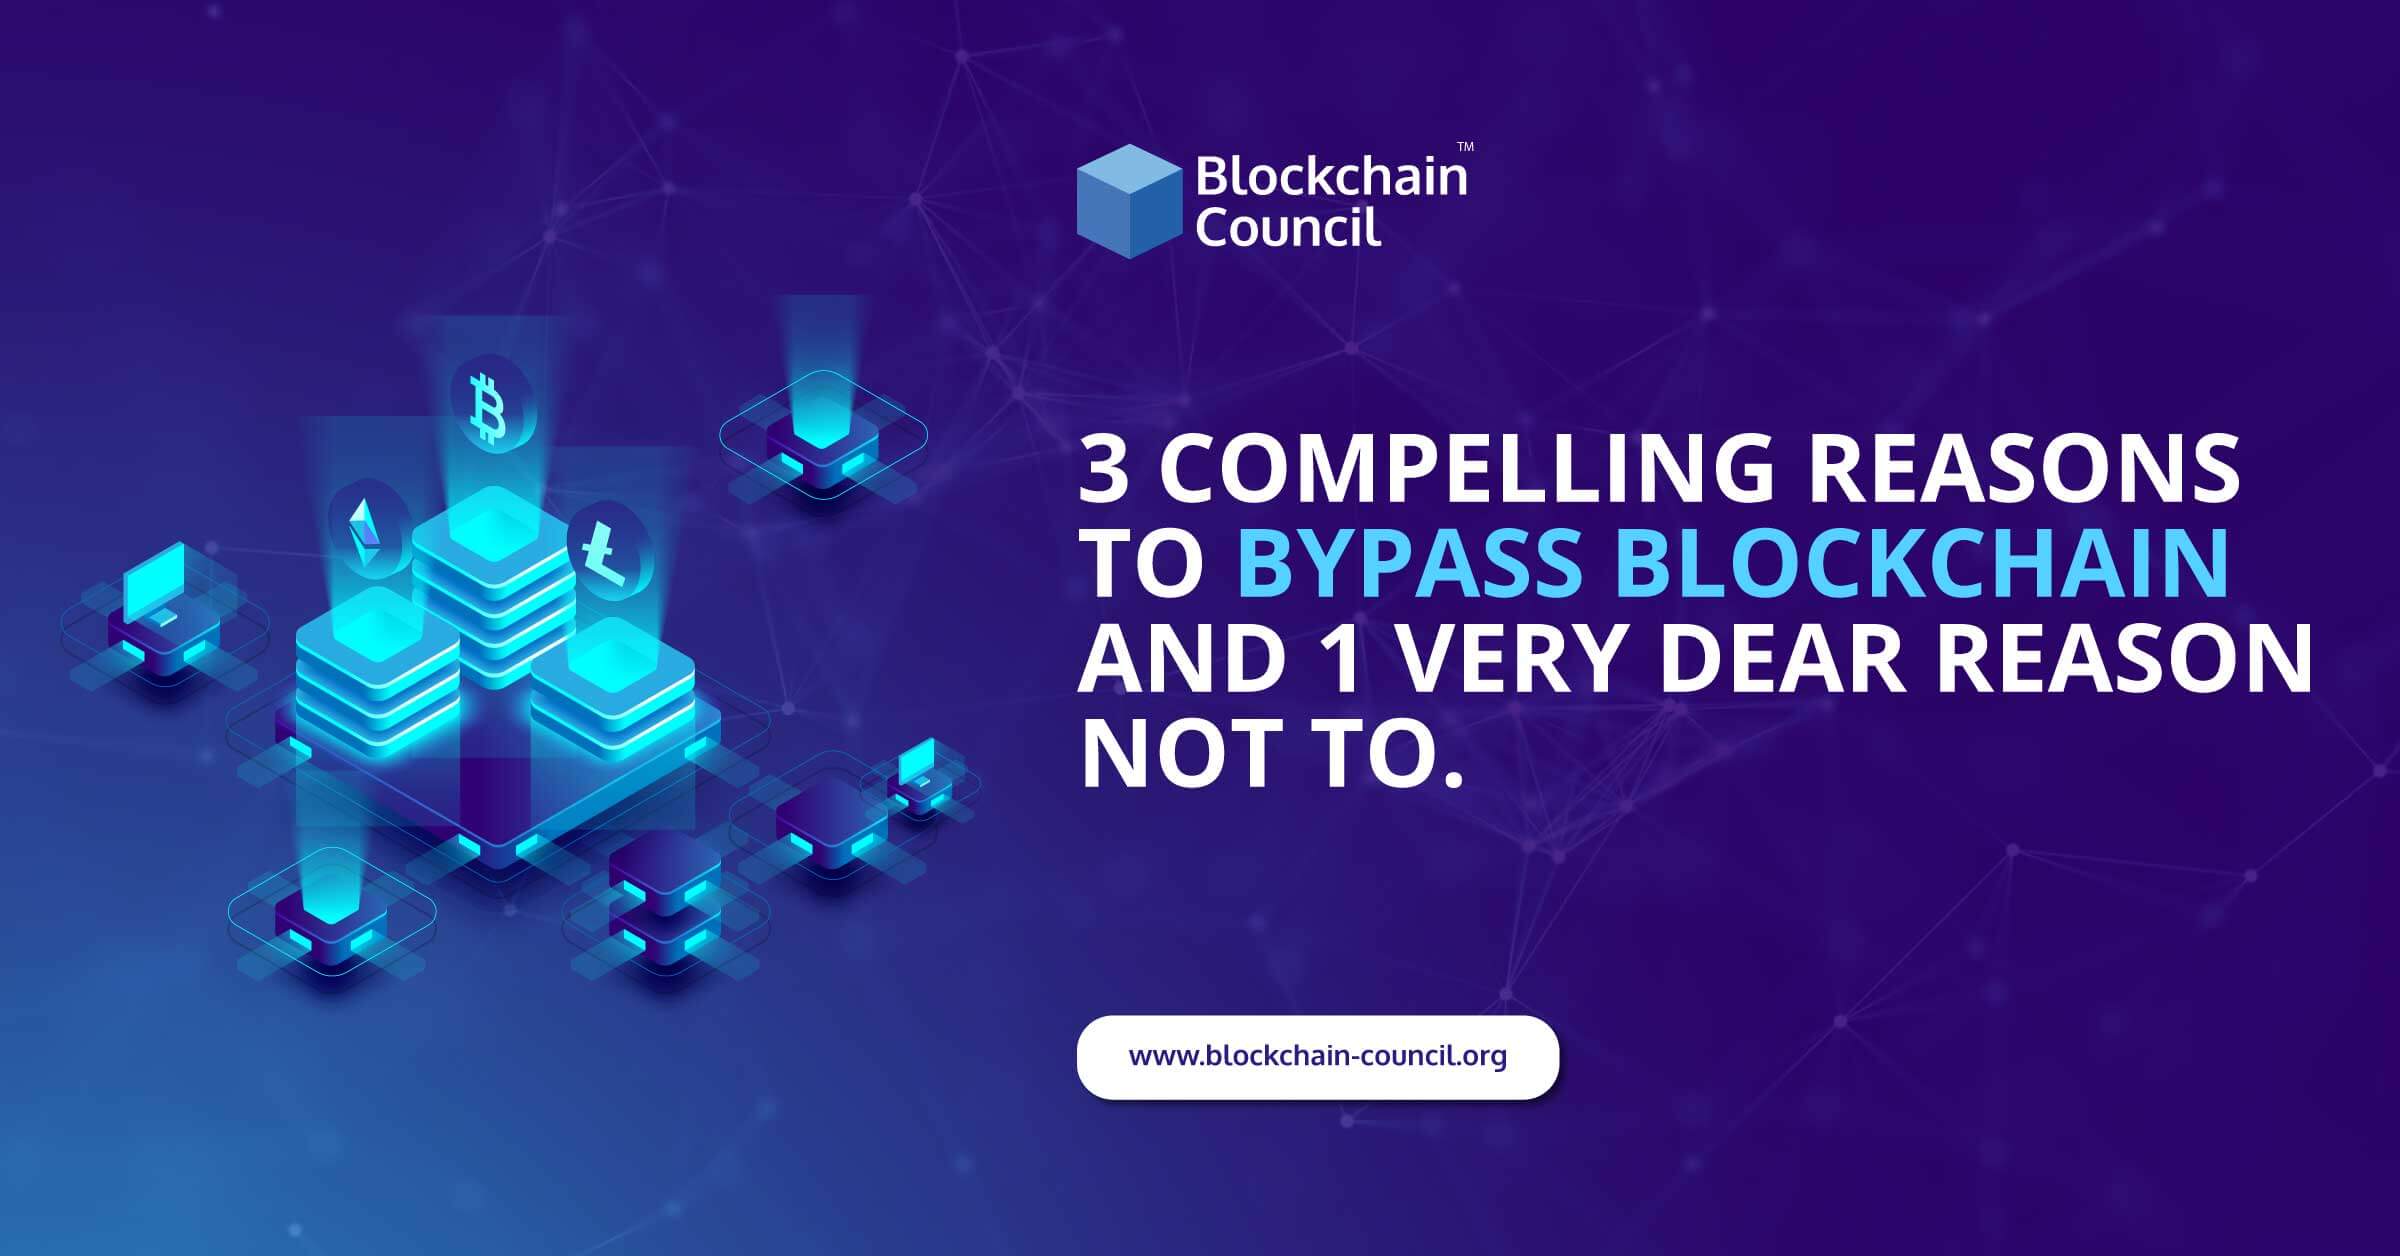 3 Compelling Reasons to Bypass Blockchain and 1 Very Dear Reason Not To